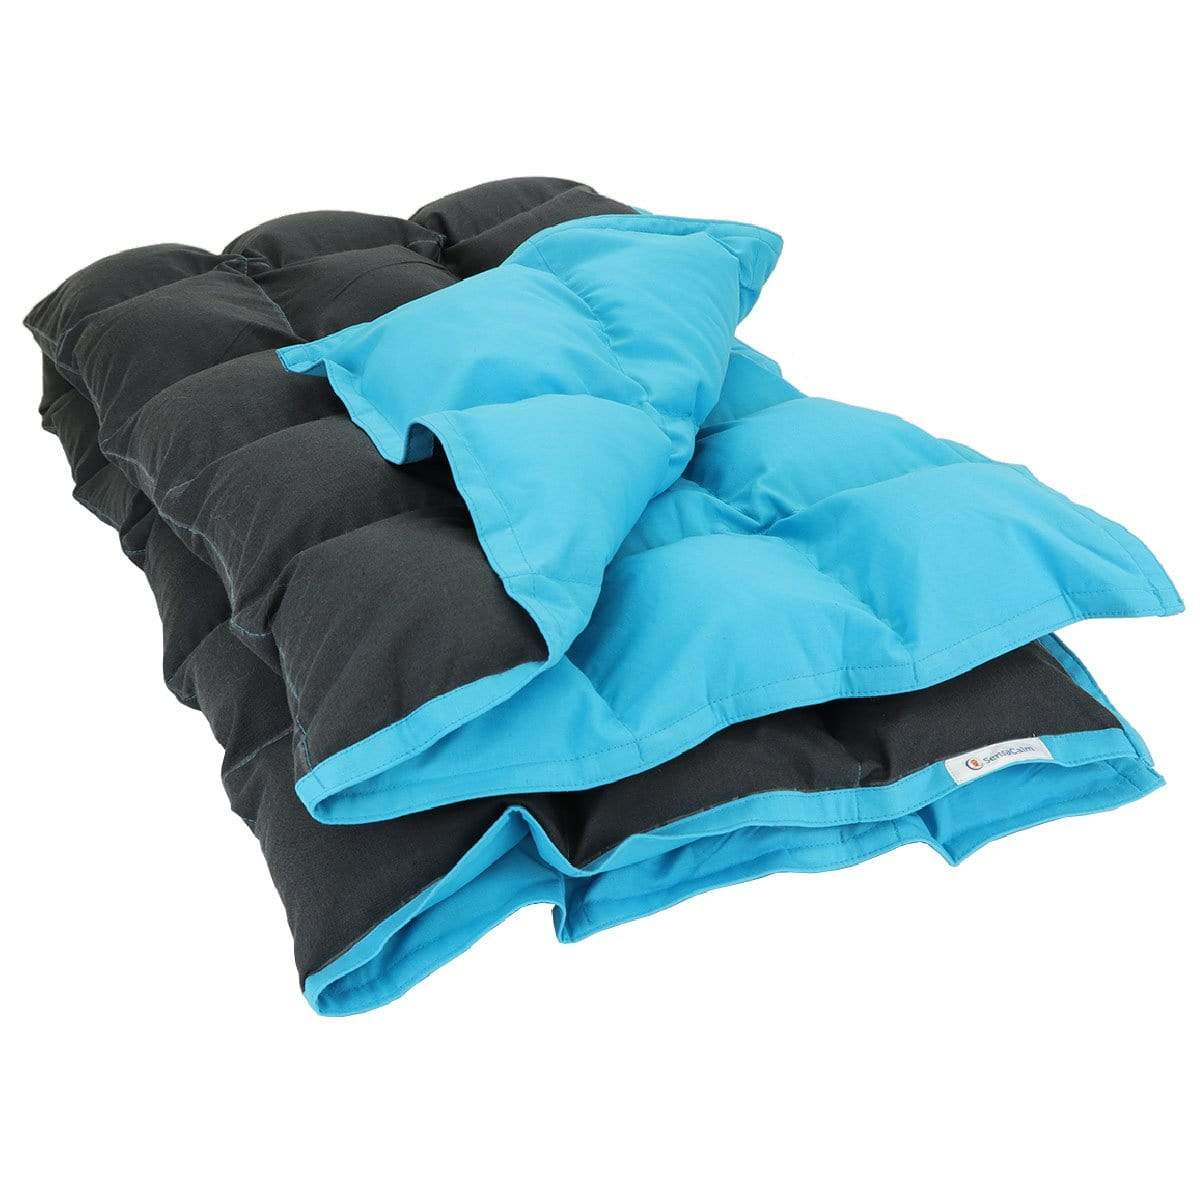 Stock Weighted Blanket - Queen Peppered Charcoal and Scuba